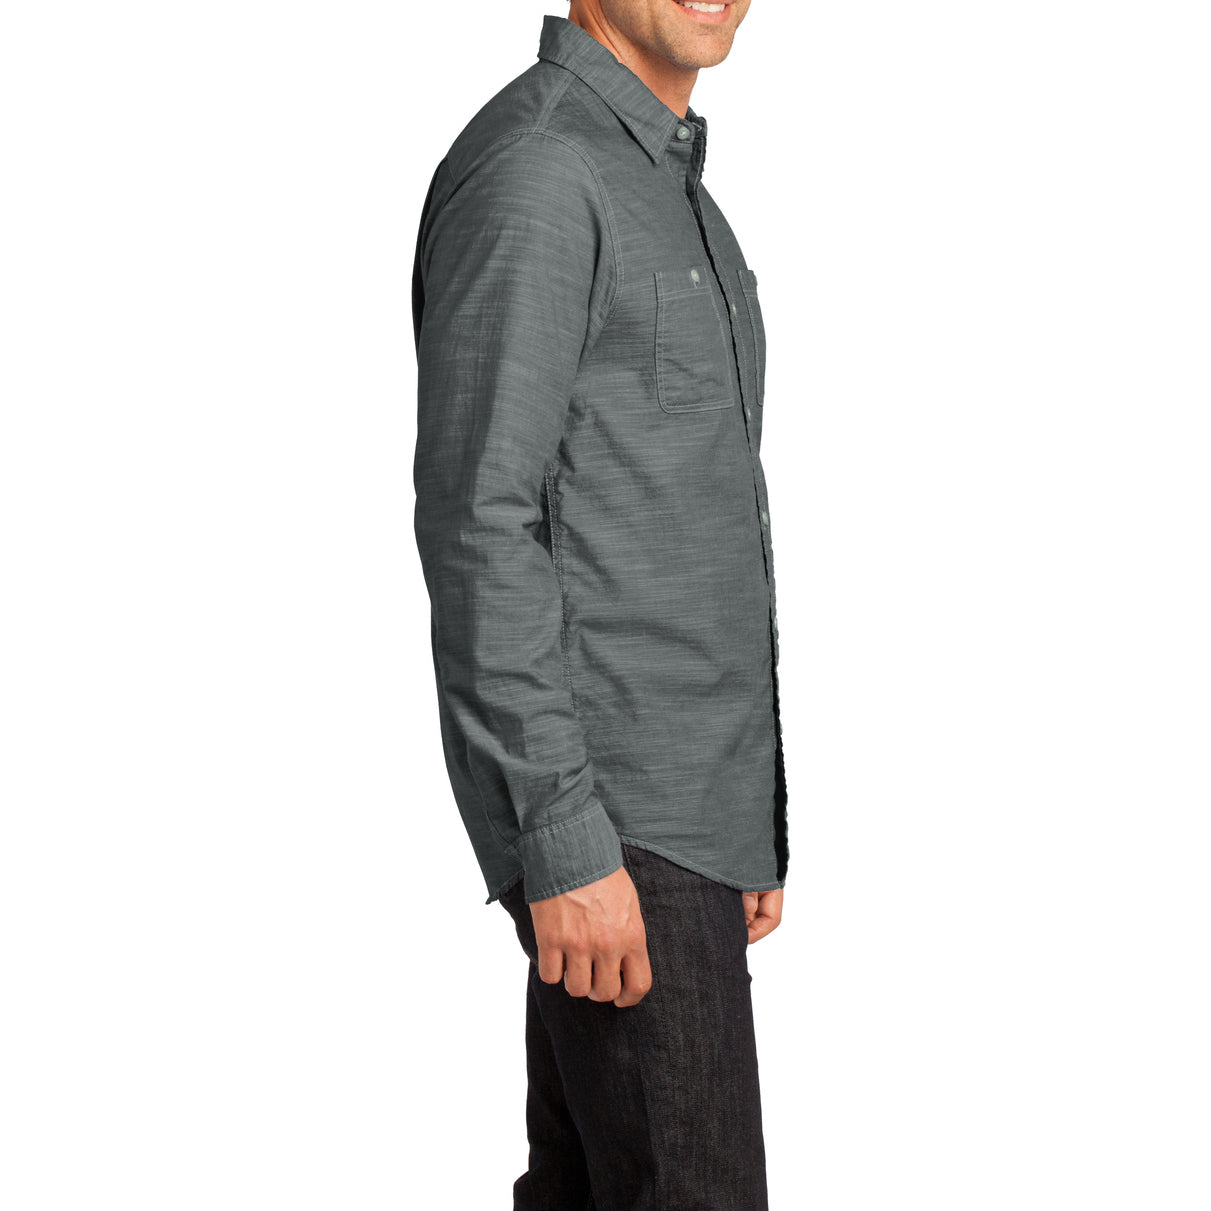 Mens Long Sleeve Washed Woven Shirt - Grey - Side